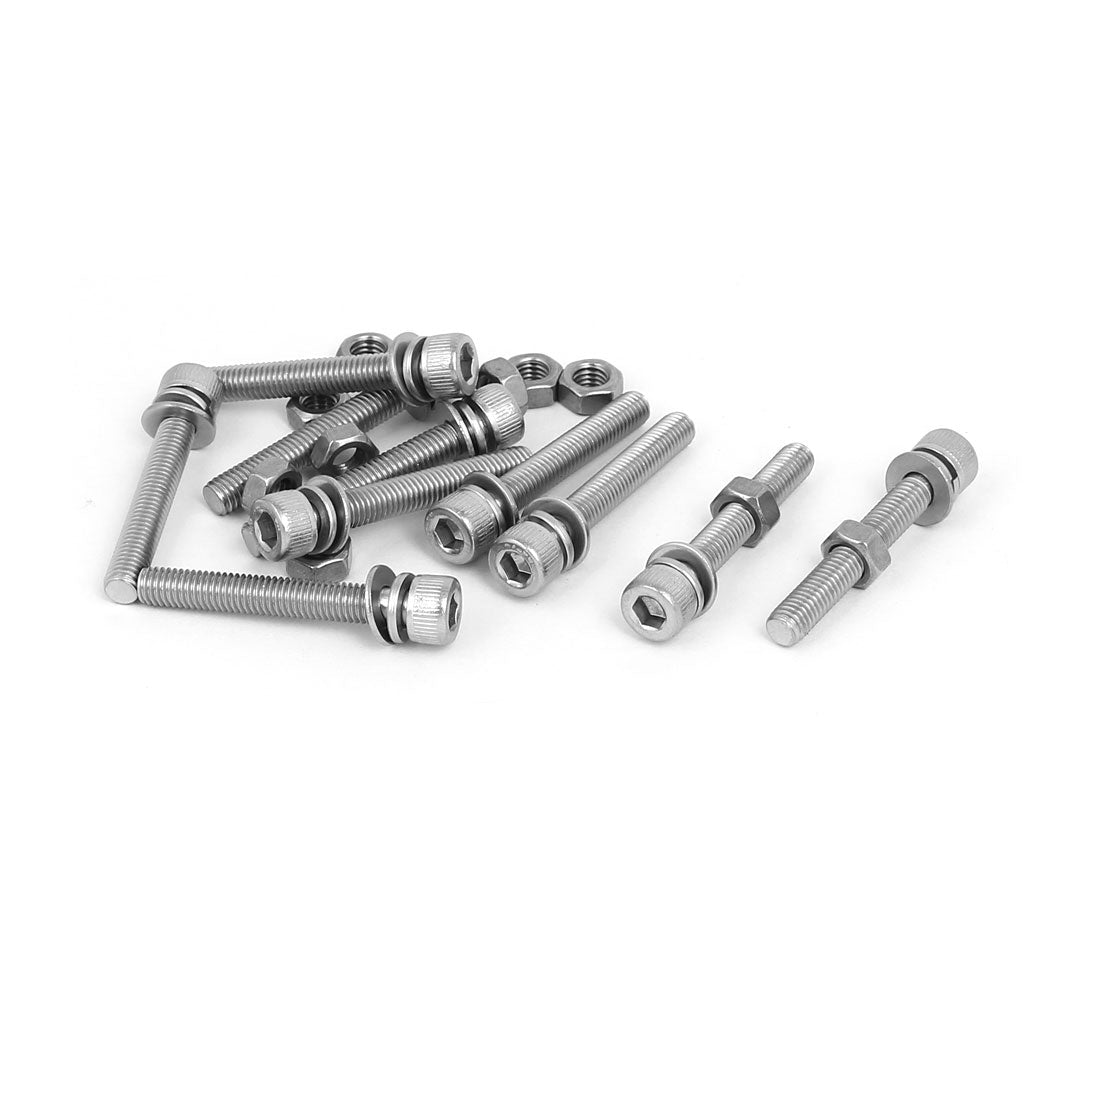 uxcell Uxcell M5 x 35mm 304 Stainless Steel Hex Socket Head Cap Screws Nuts w Washers 10 Sets